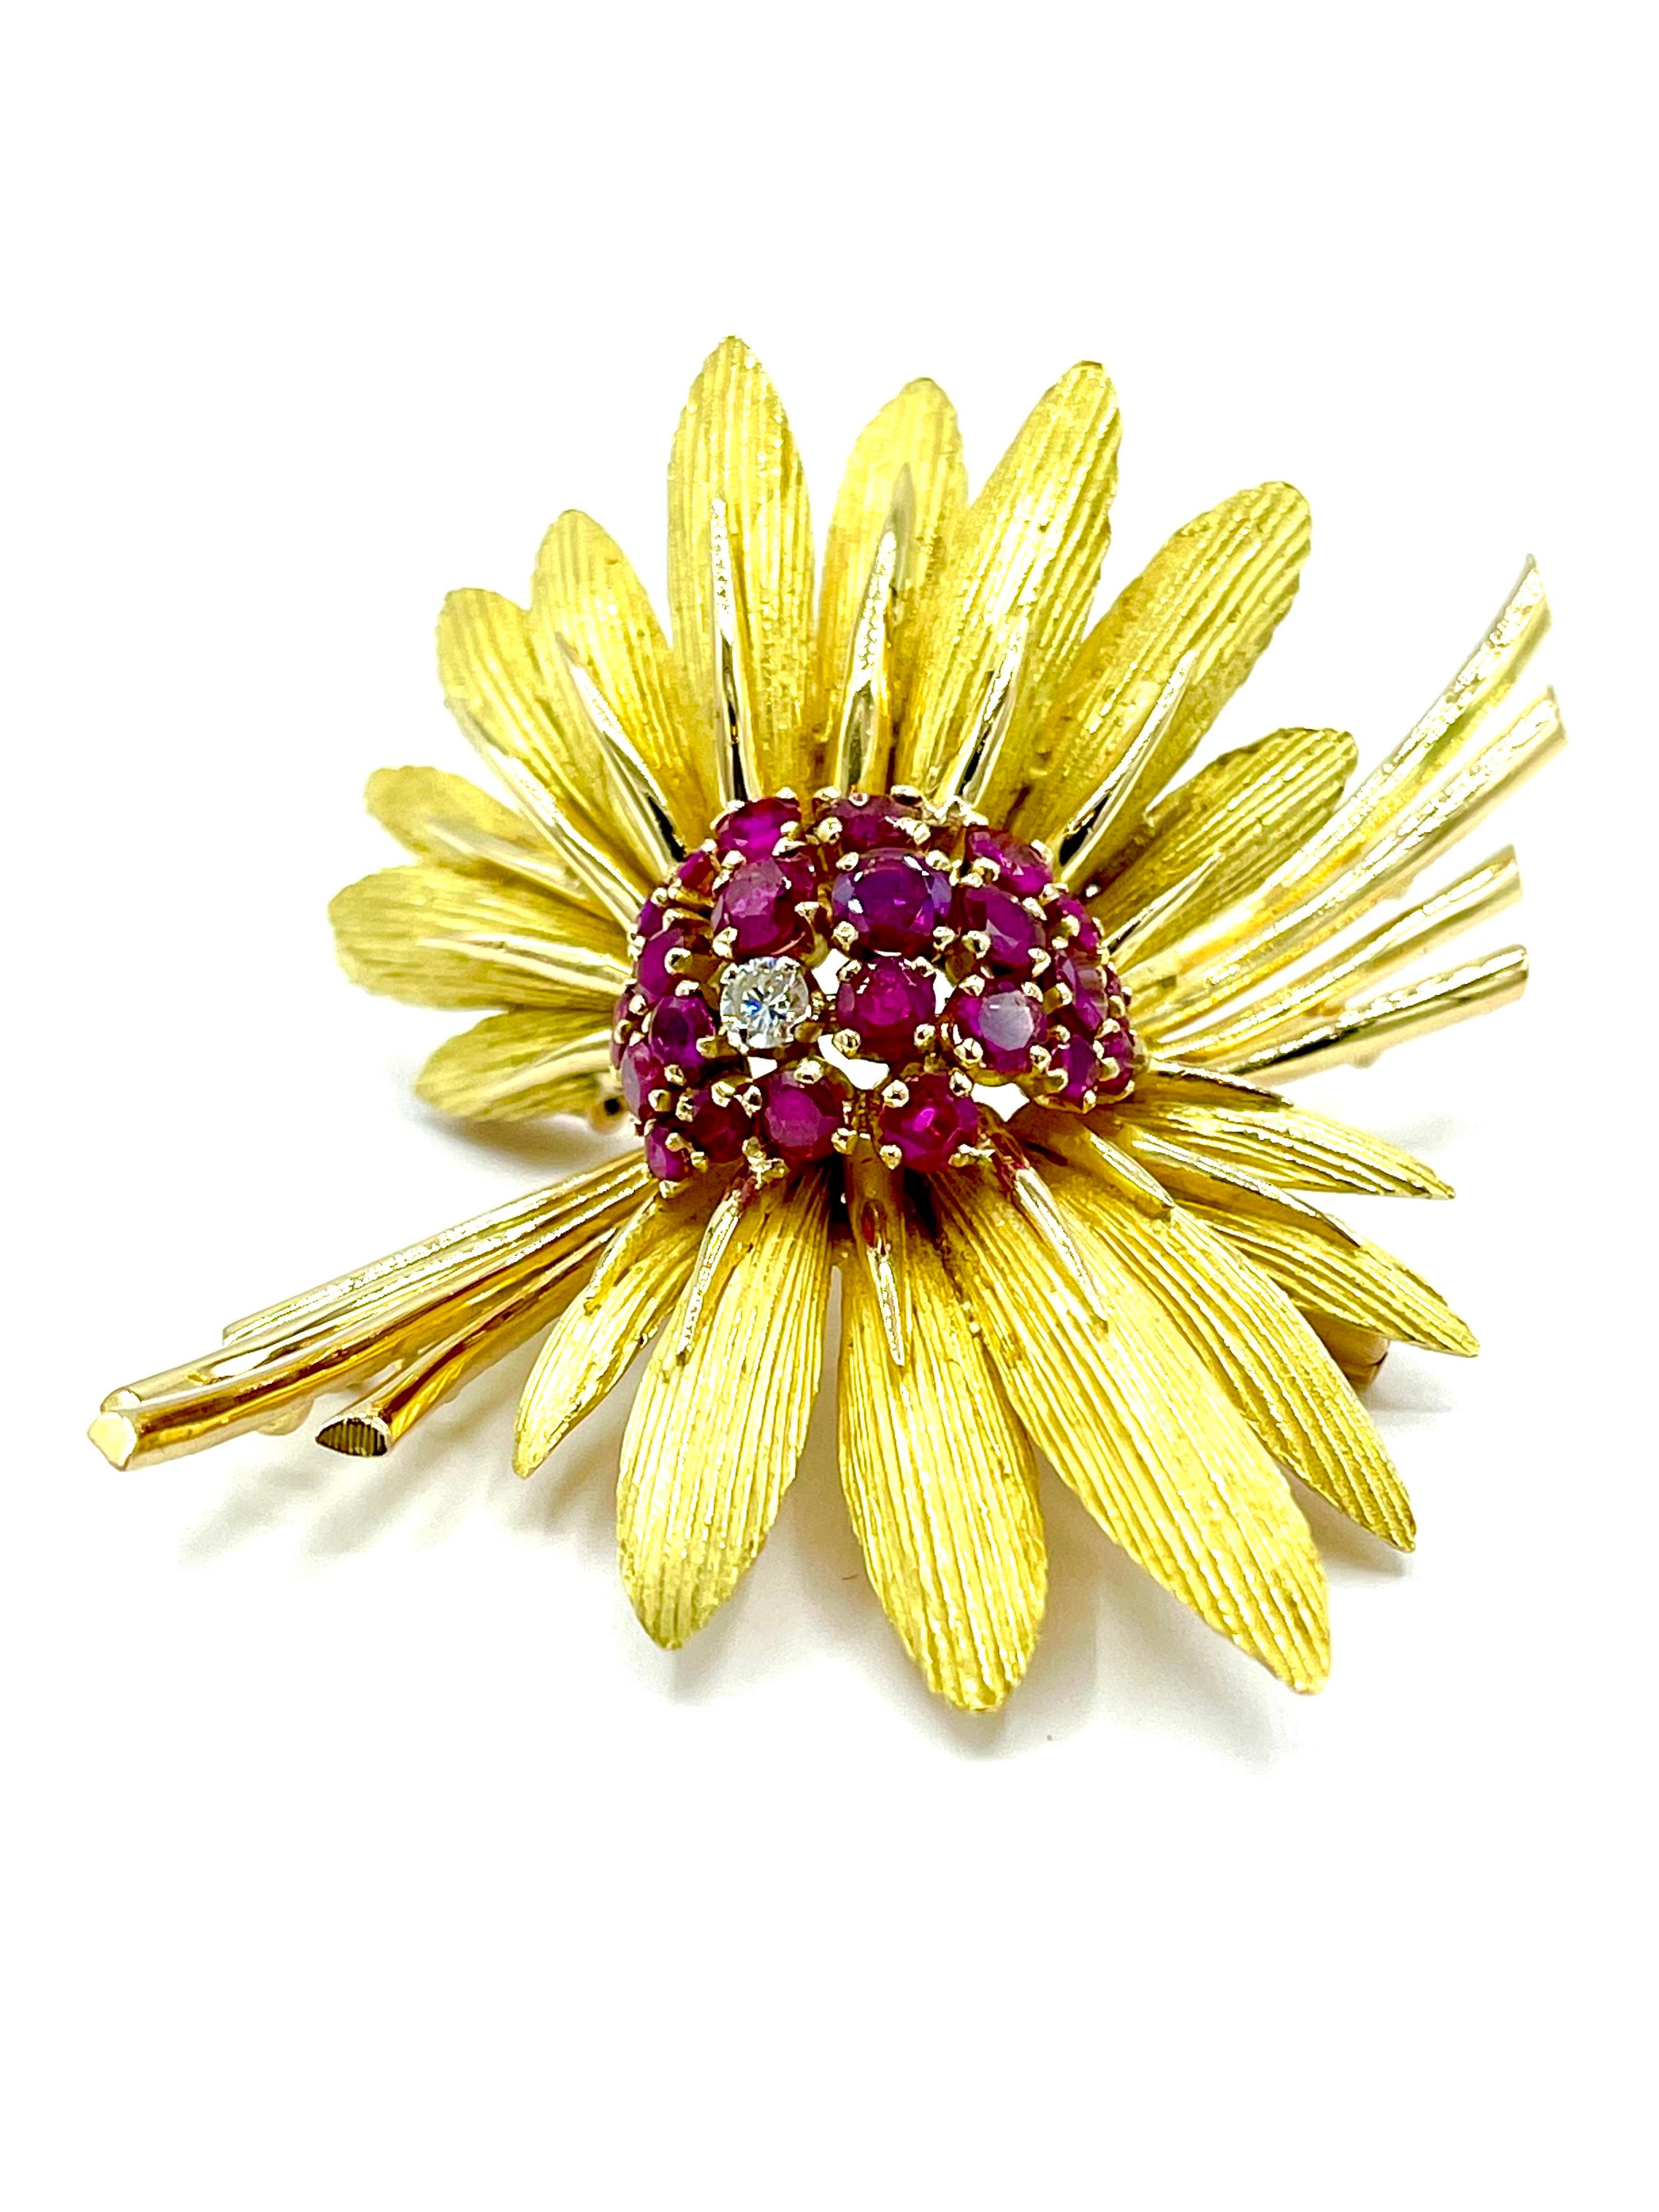 Such an incredibly detailed design feathered brooch.  The domed center contains 24 round faceted Rubies with one round brilliant cut Diamond.  The feathers have a beautiful brushed gold finish with polished stems in 18k yellow gold.  There is a